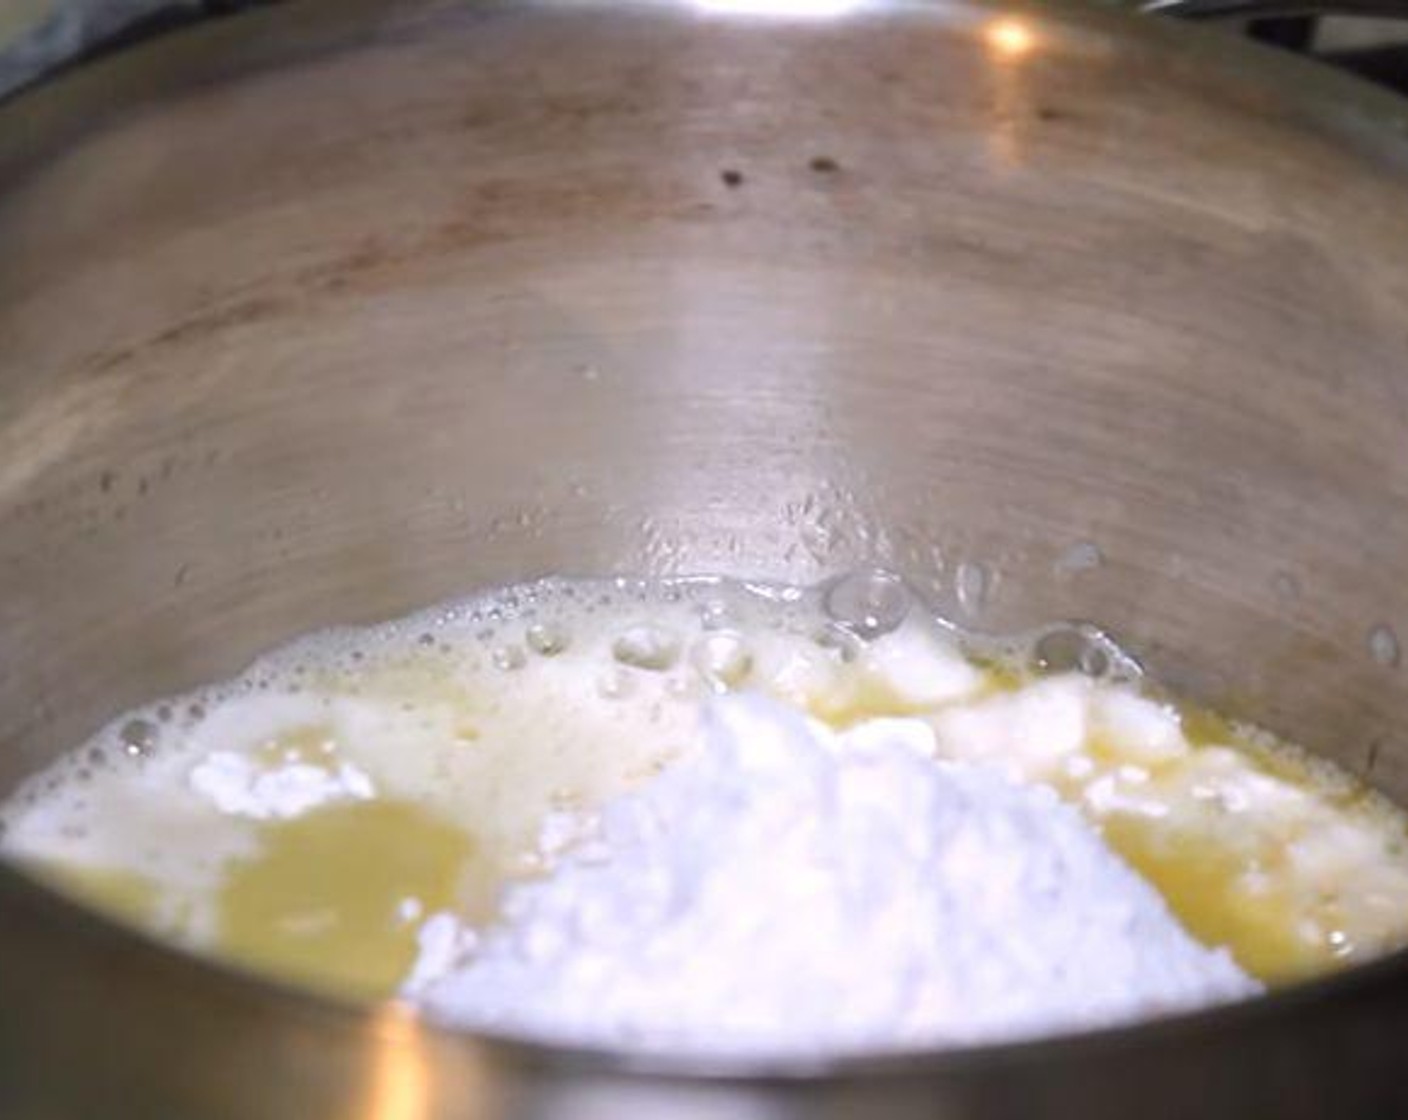 step 1 Put a saucepan over medium heat. Add the Water (1 cup), Butter (2 Tbsp), Salt (1/2 tsp), and Granulated Sugar (1 Tbsp). Let the water come to a boil. Add the All-Purpose Flour (1 cup) and turn the heat to low. Whisk everything together.